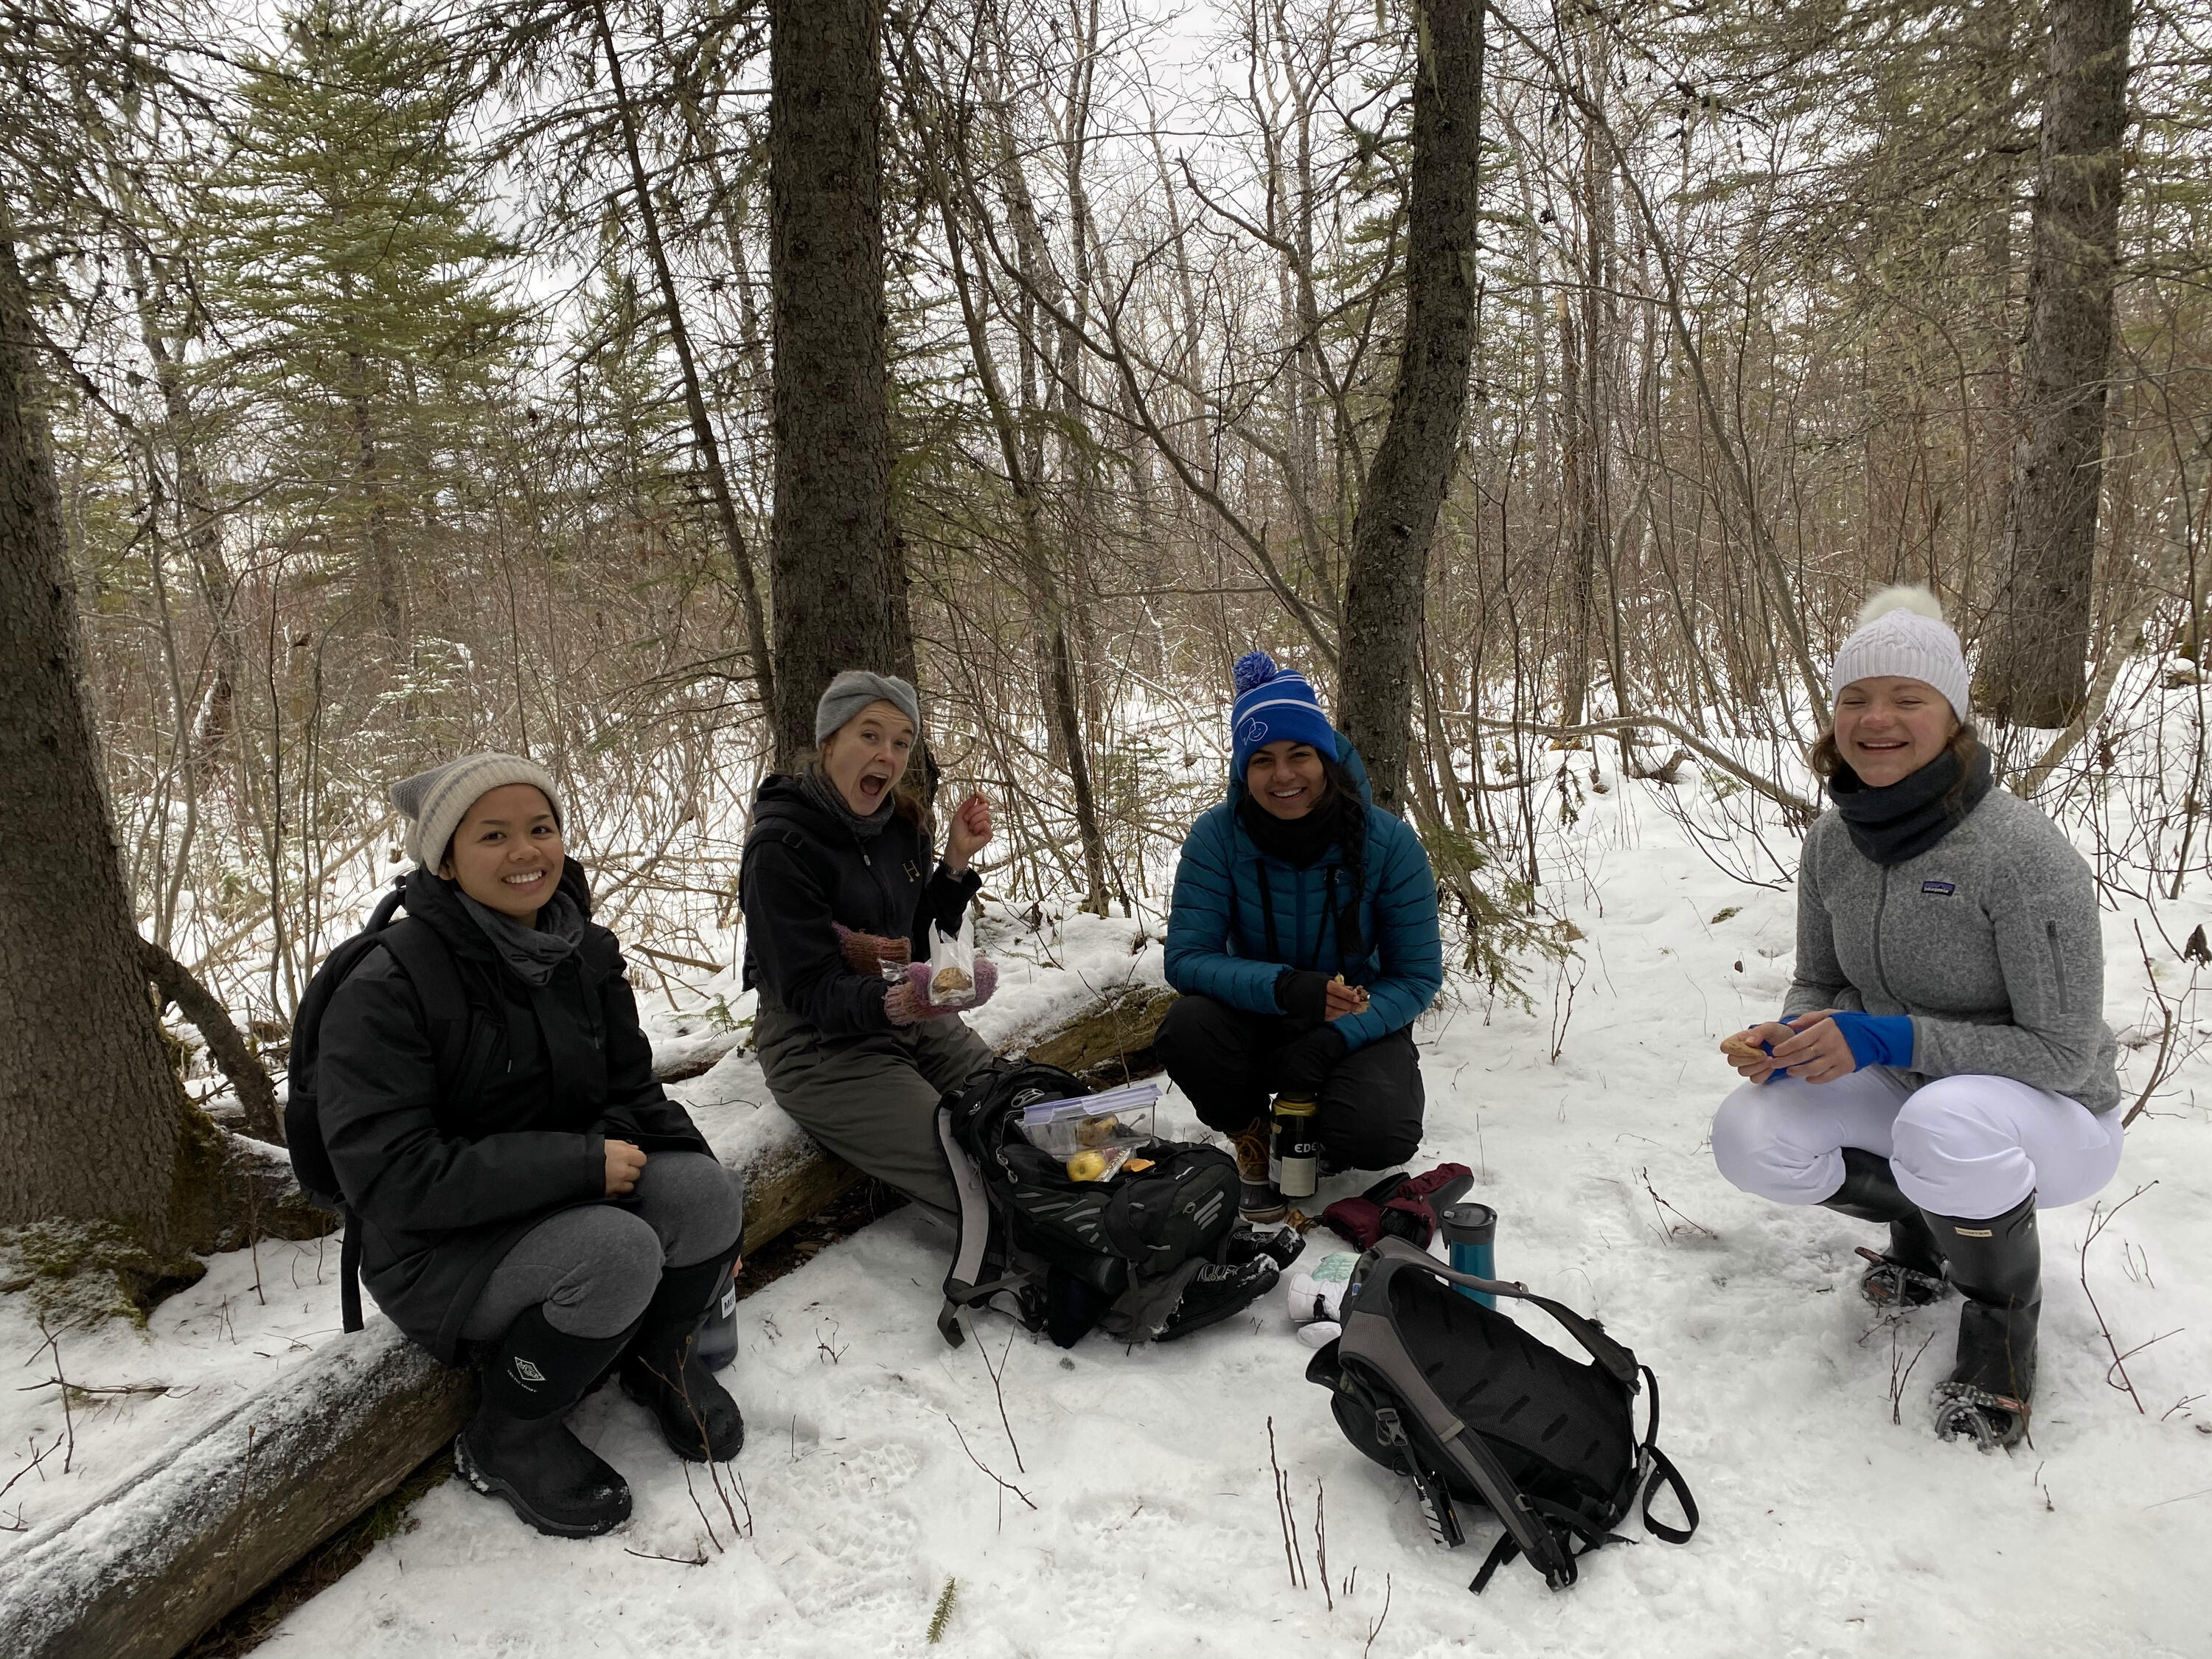 Celine sitting on a log with other students in the snow